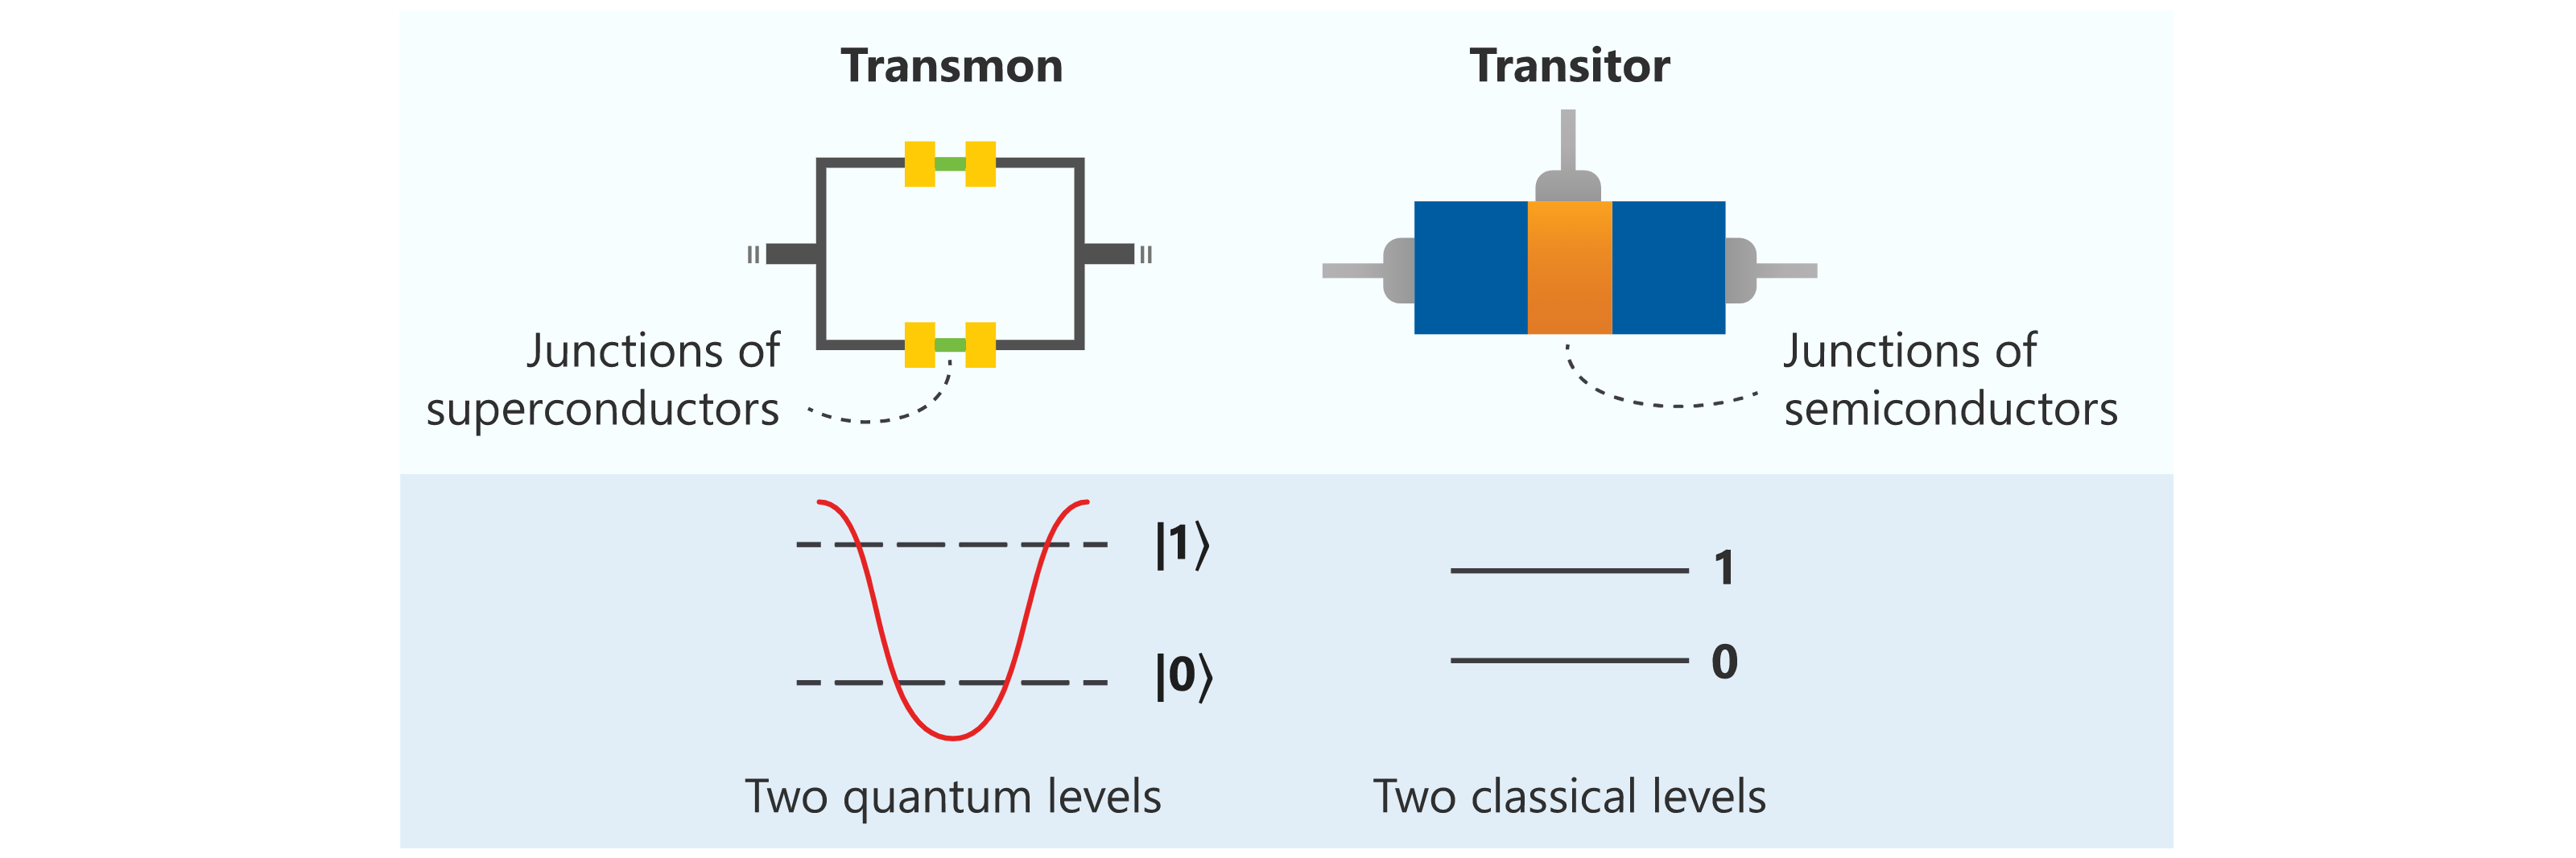 Diagram comparing a transmon with a transistor. The transmon can be prepared in a quantum superposition while the transistor only admits discrete classical levels.